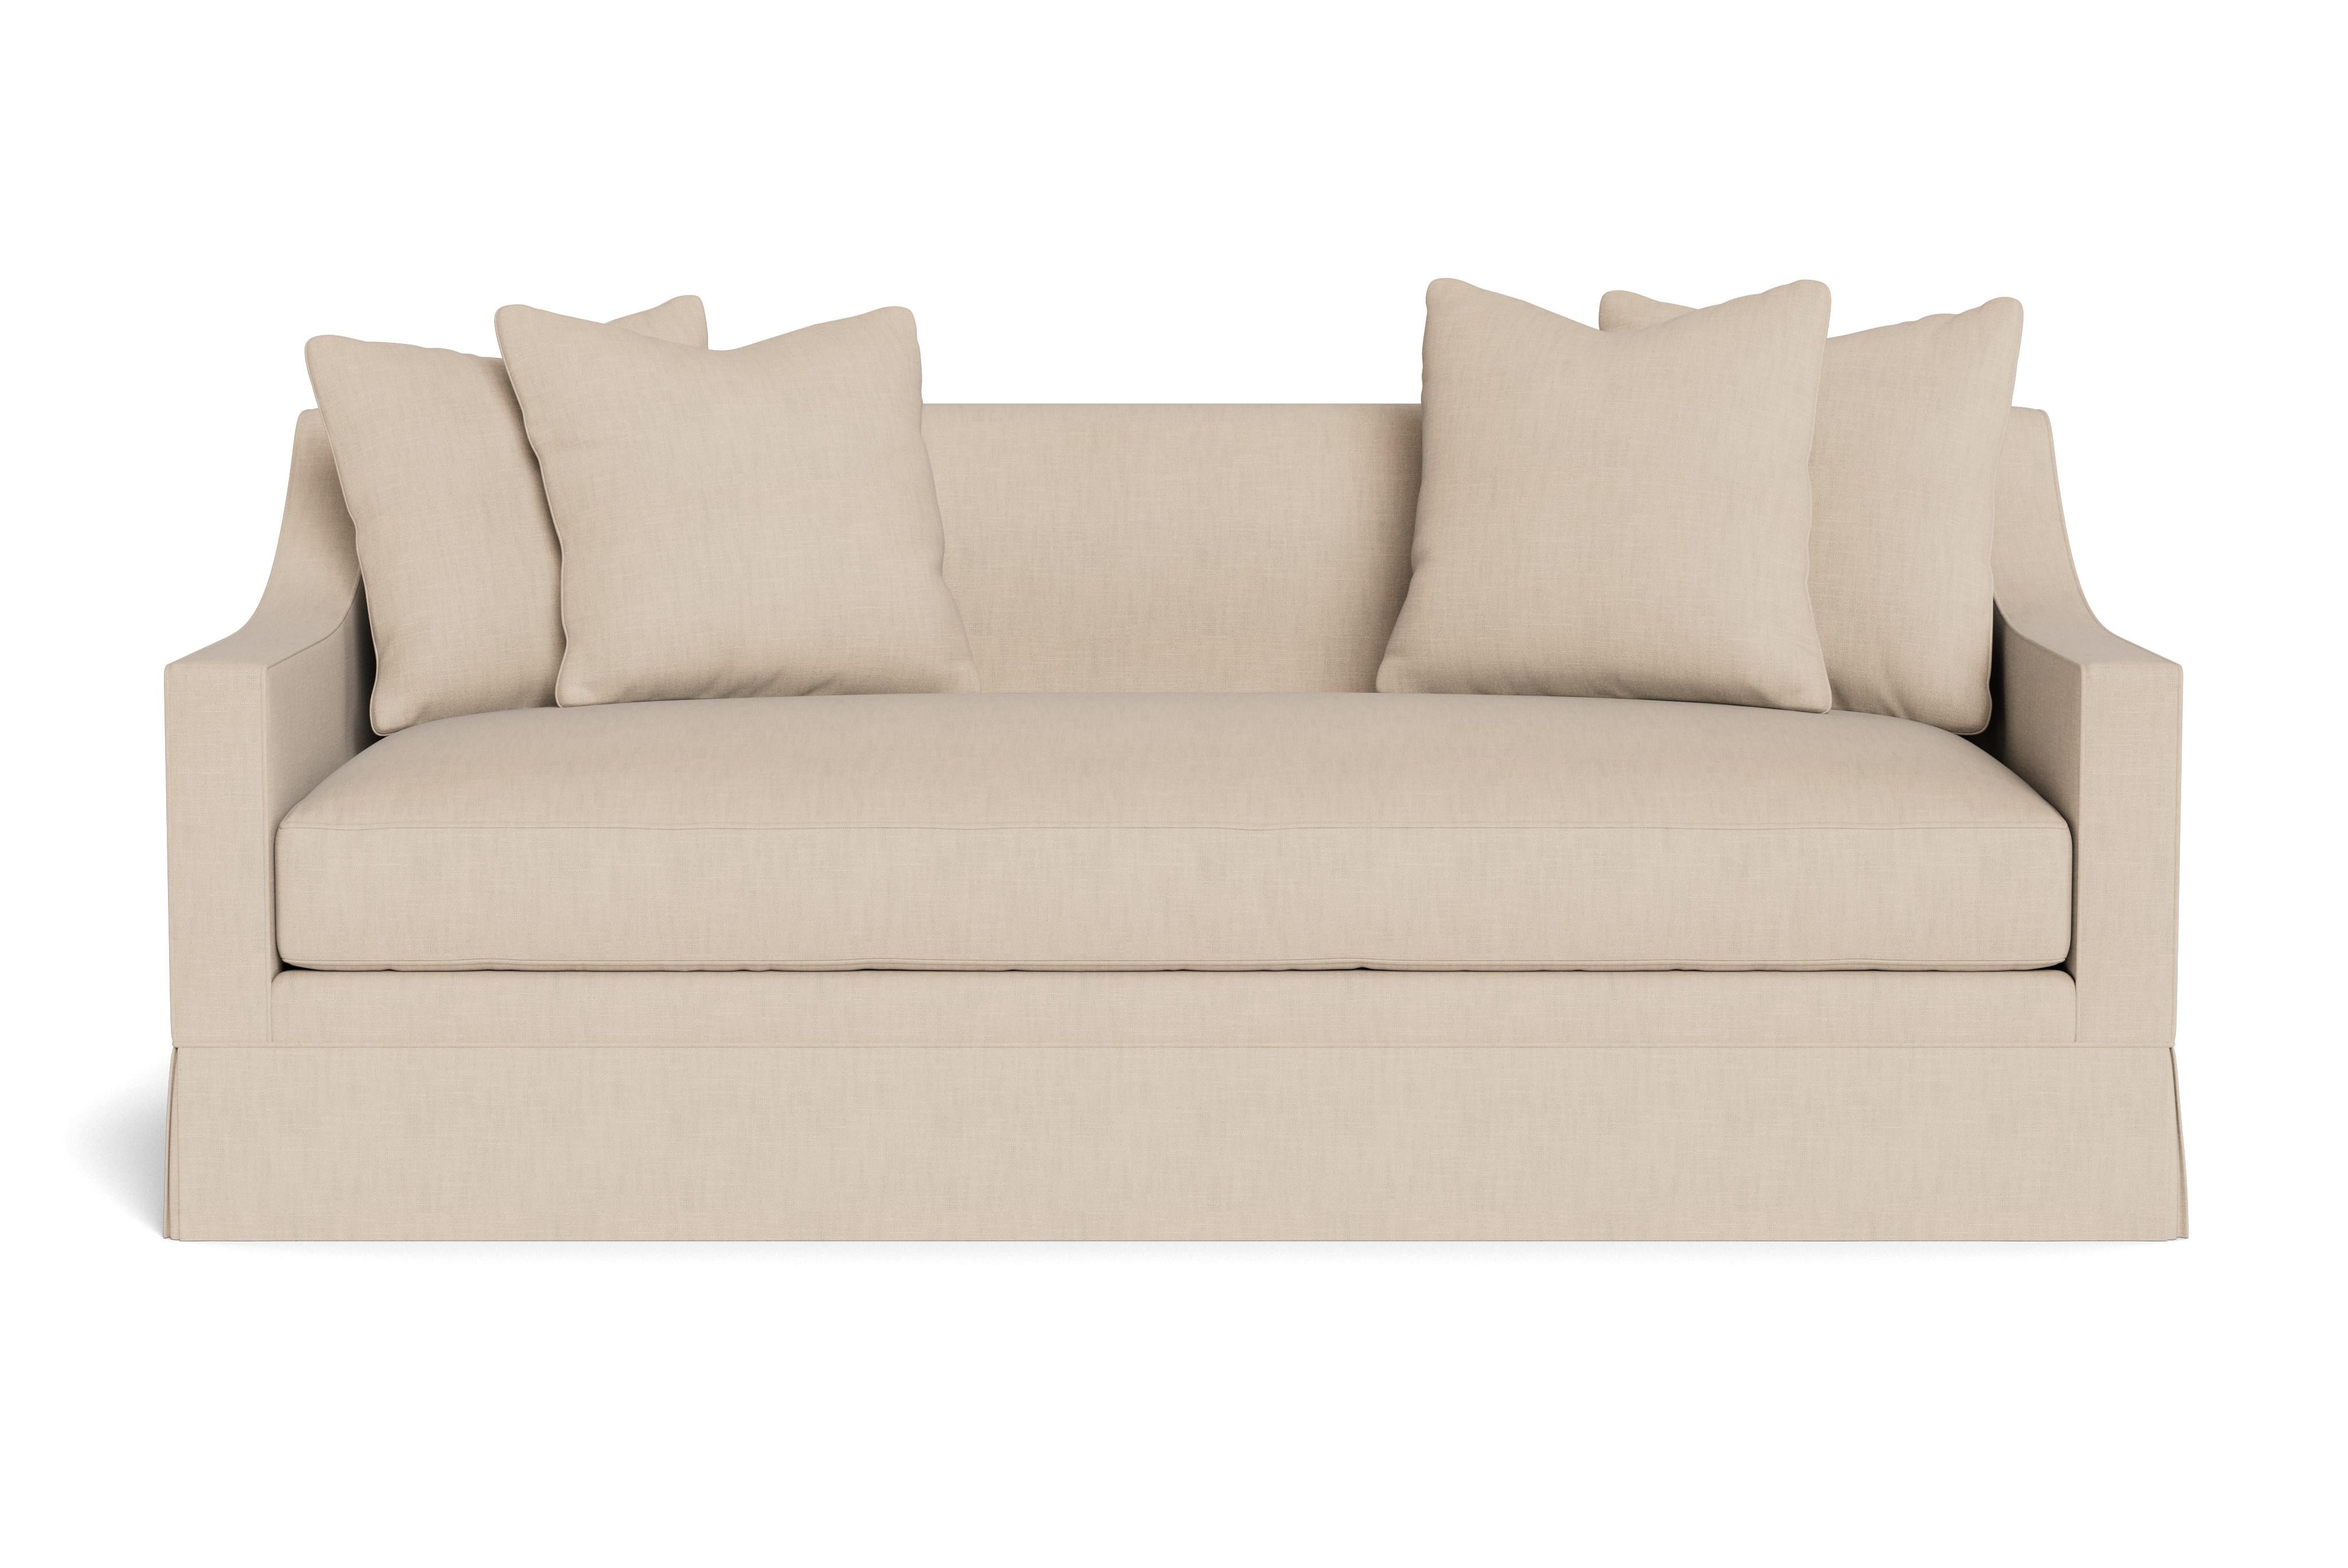 A handsome, modern skirted sofa with sloped arm. Sleek tailoring complemented by a single seat cushion and four loose pillows 21